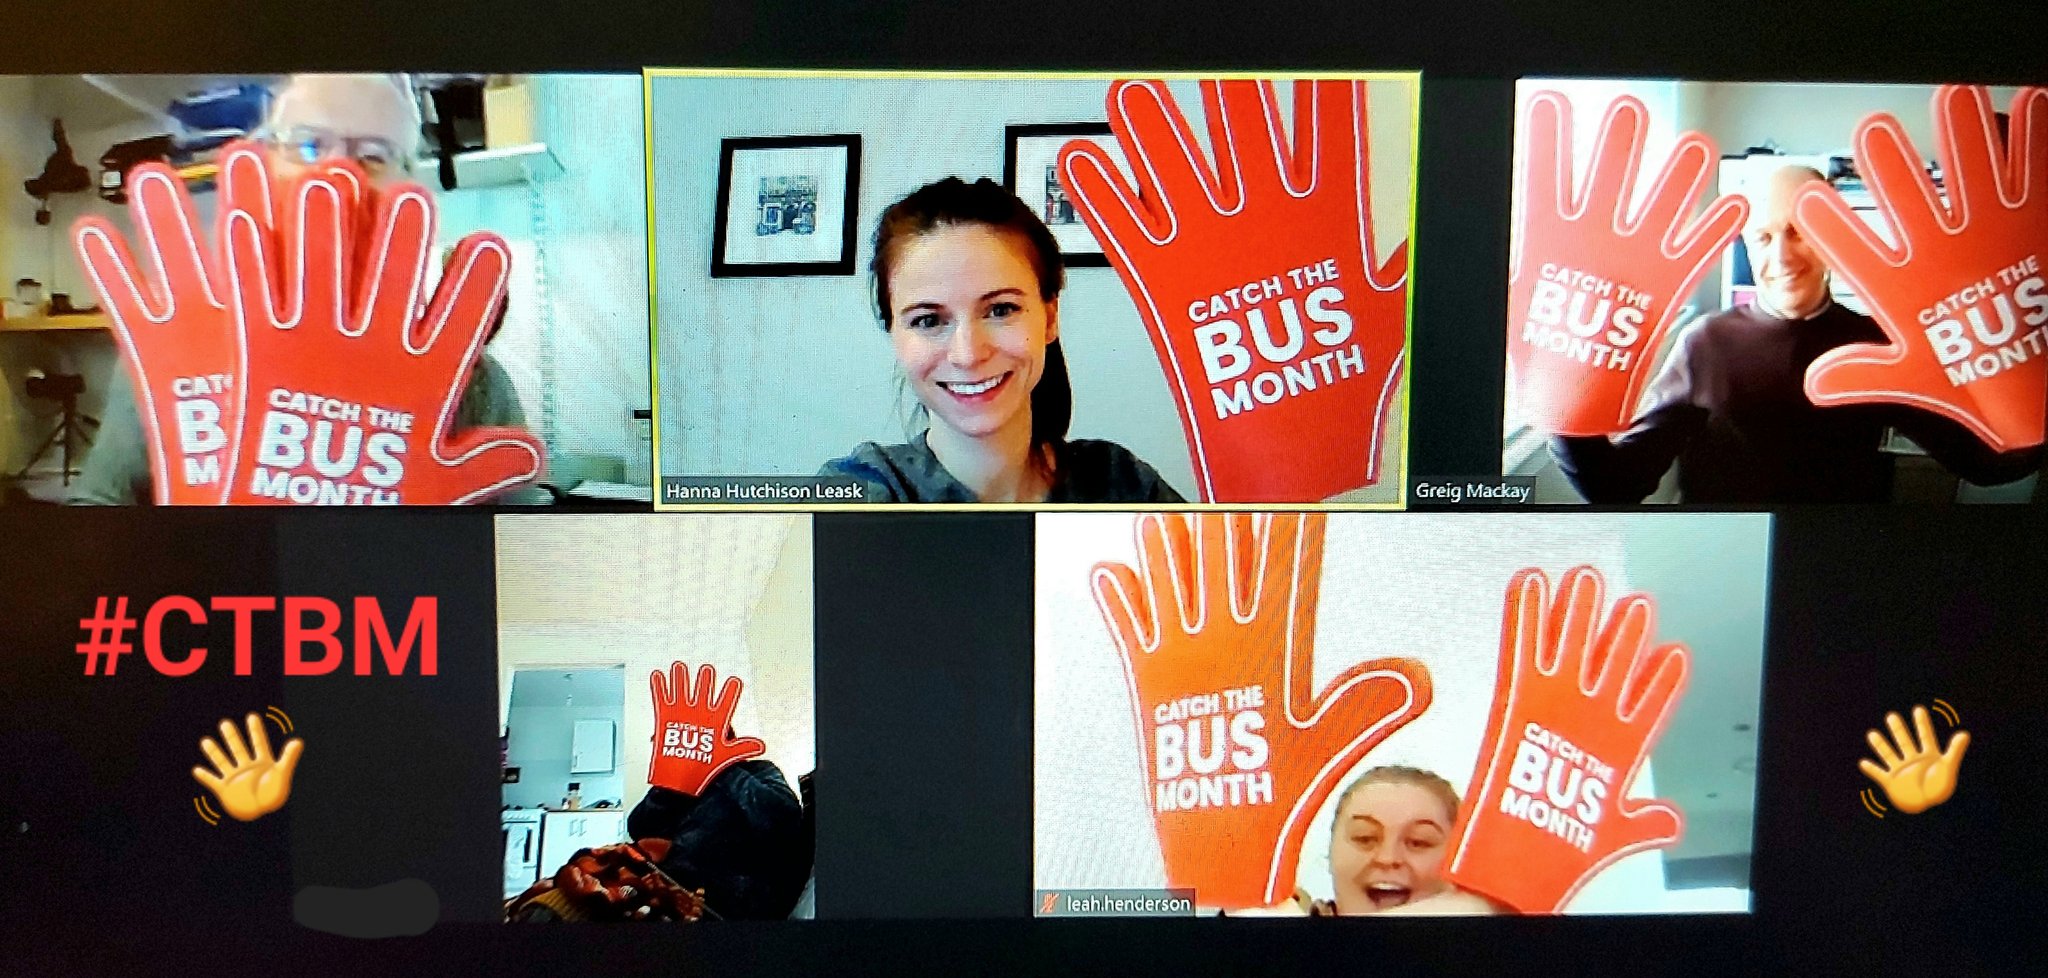 a bus users virtual team meeting with giant red hands being waved